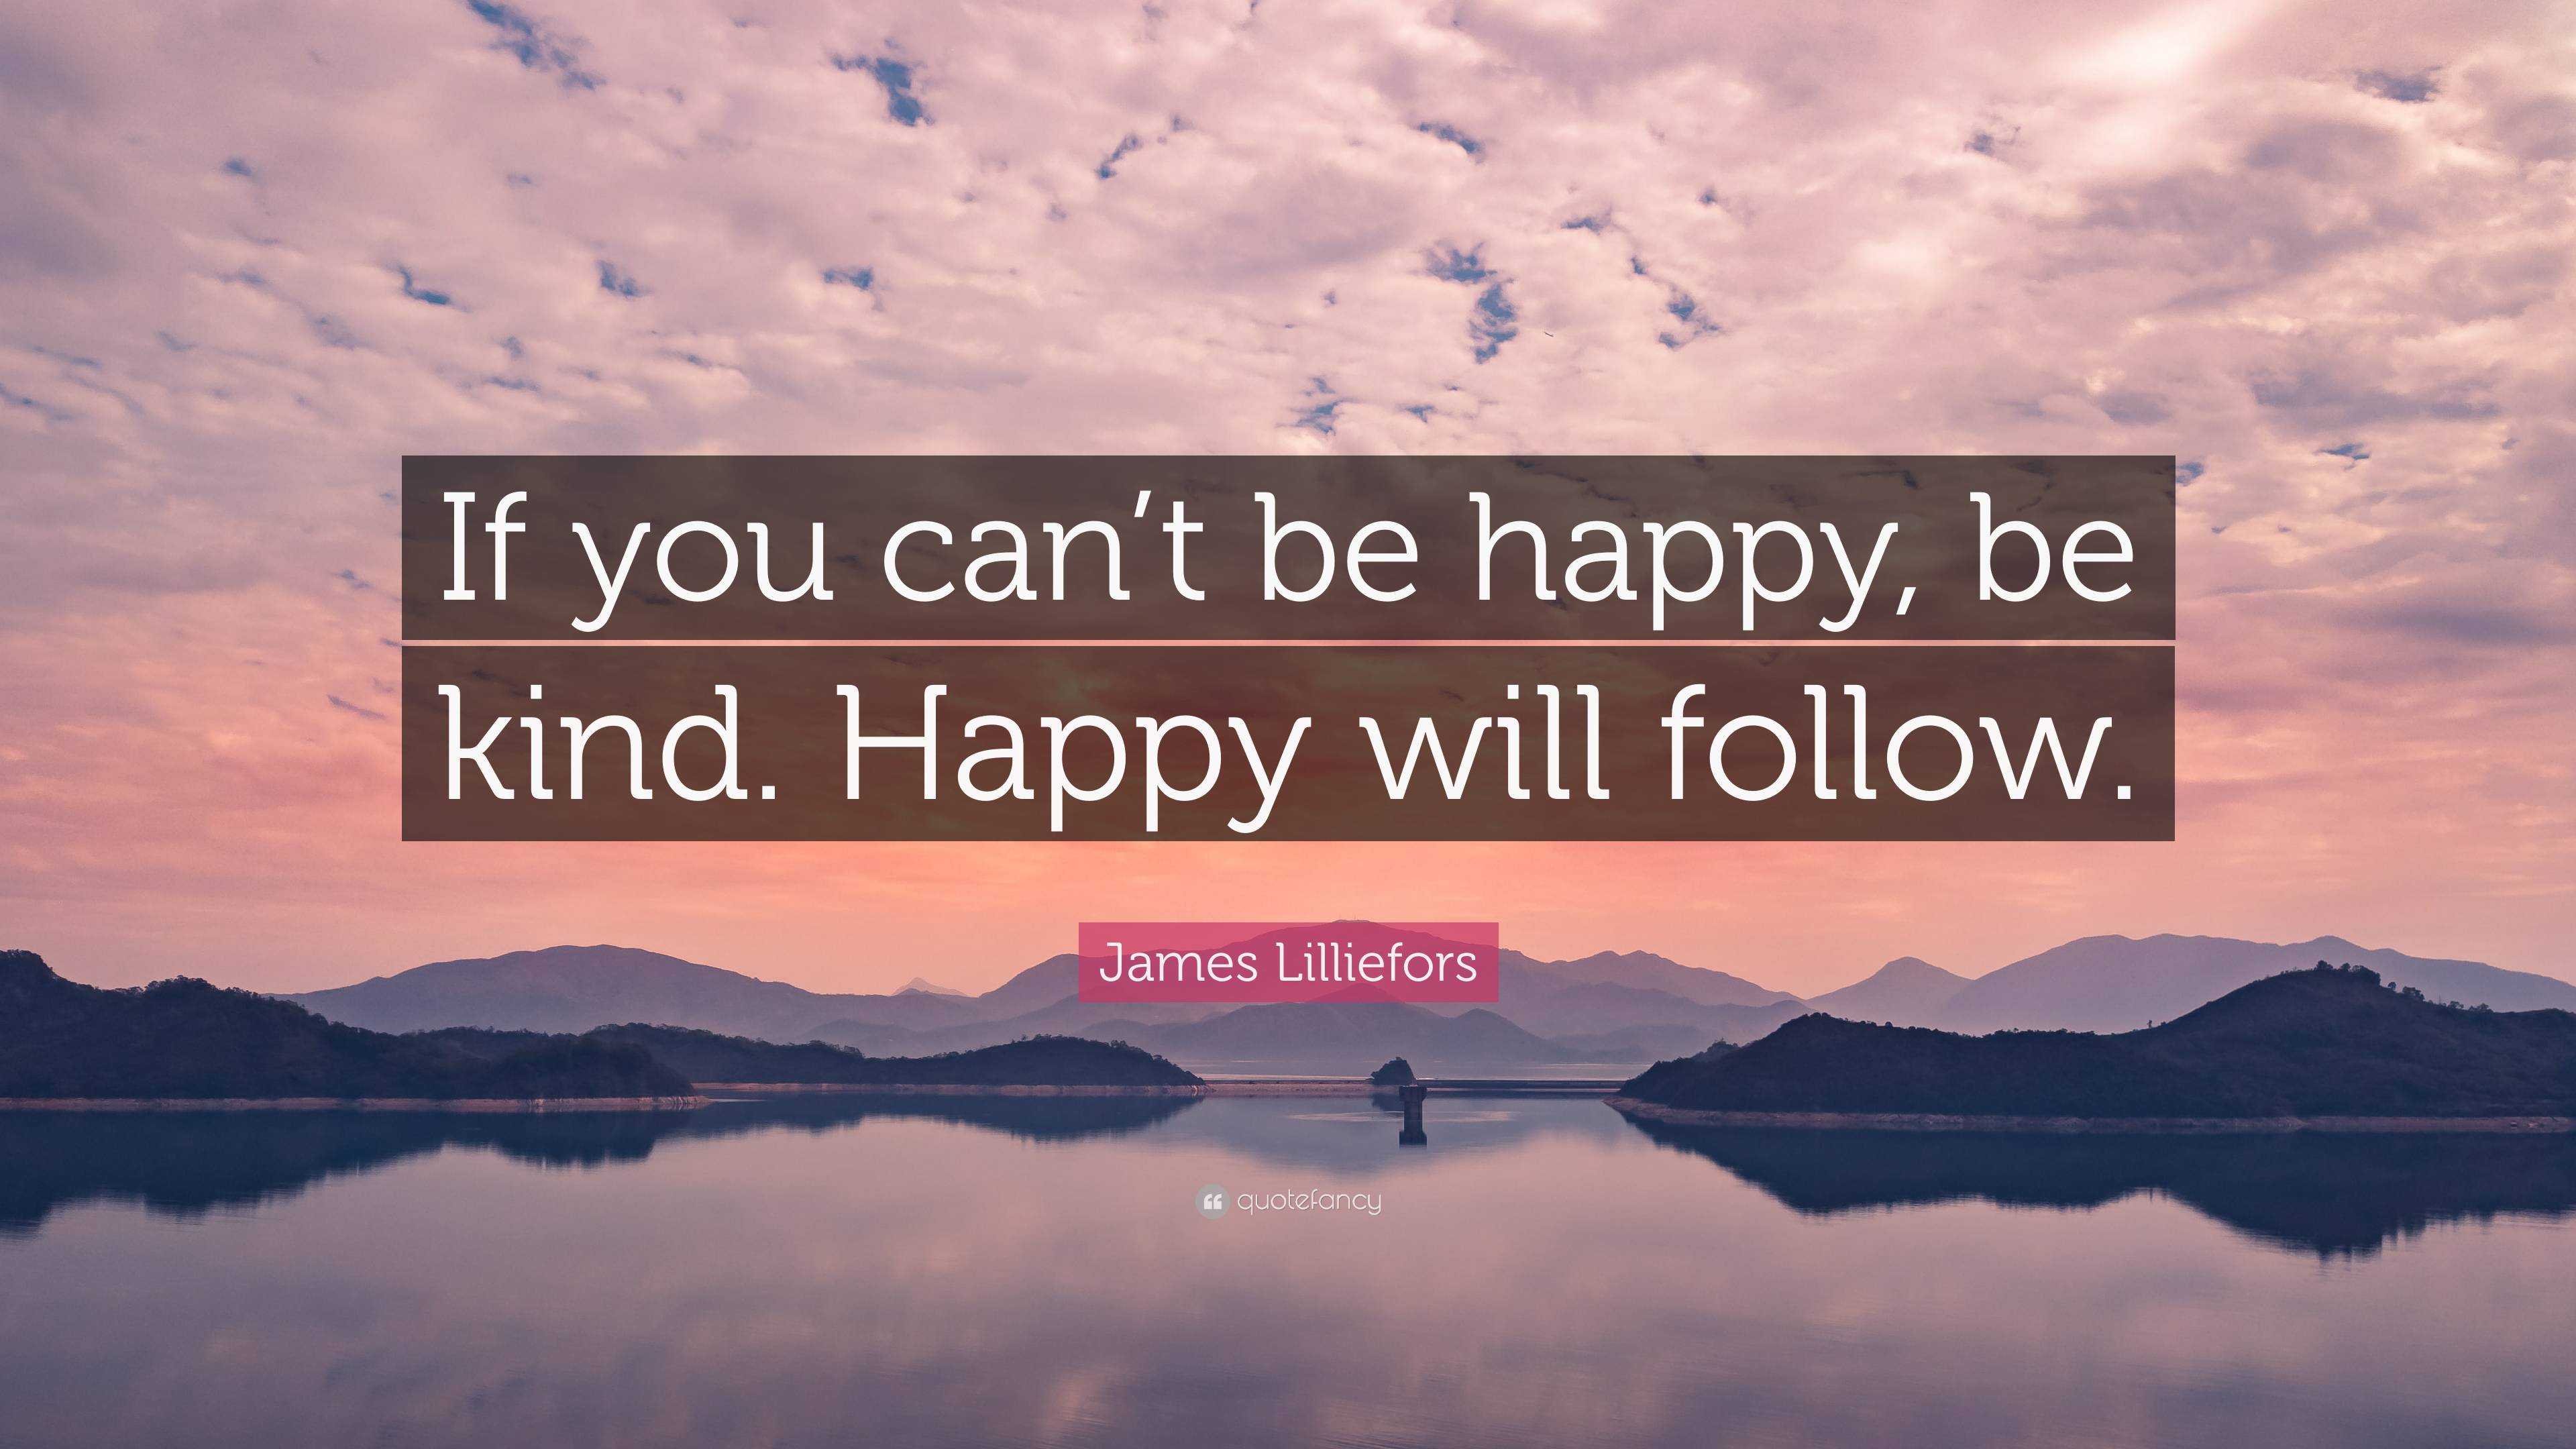 James Lilliefors Quote: “If you can’t be happy, be kind. Happy will ...